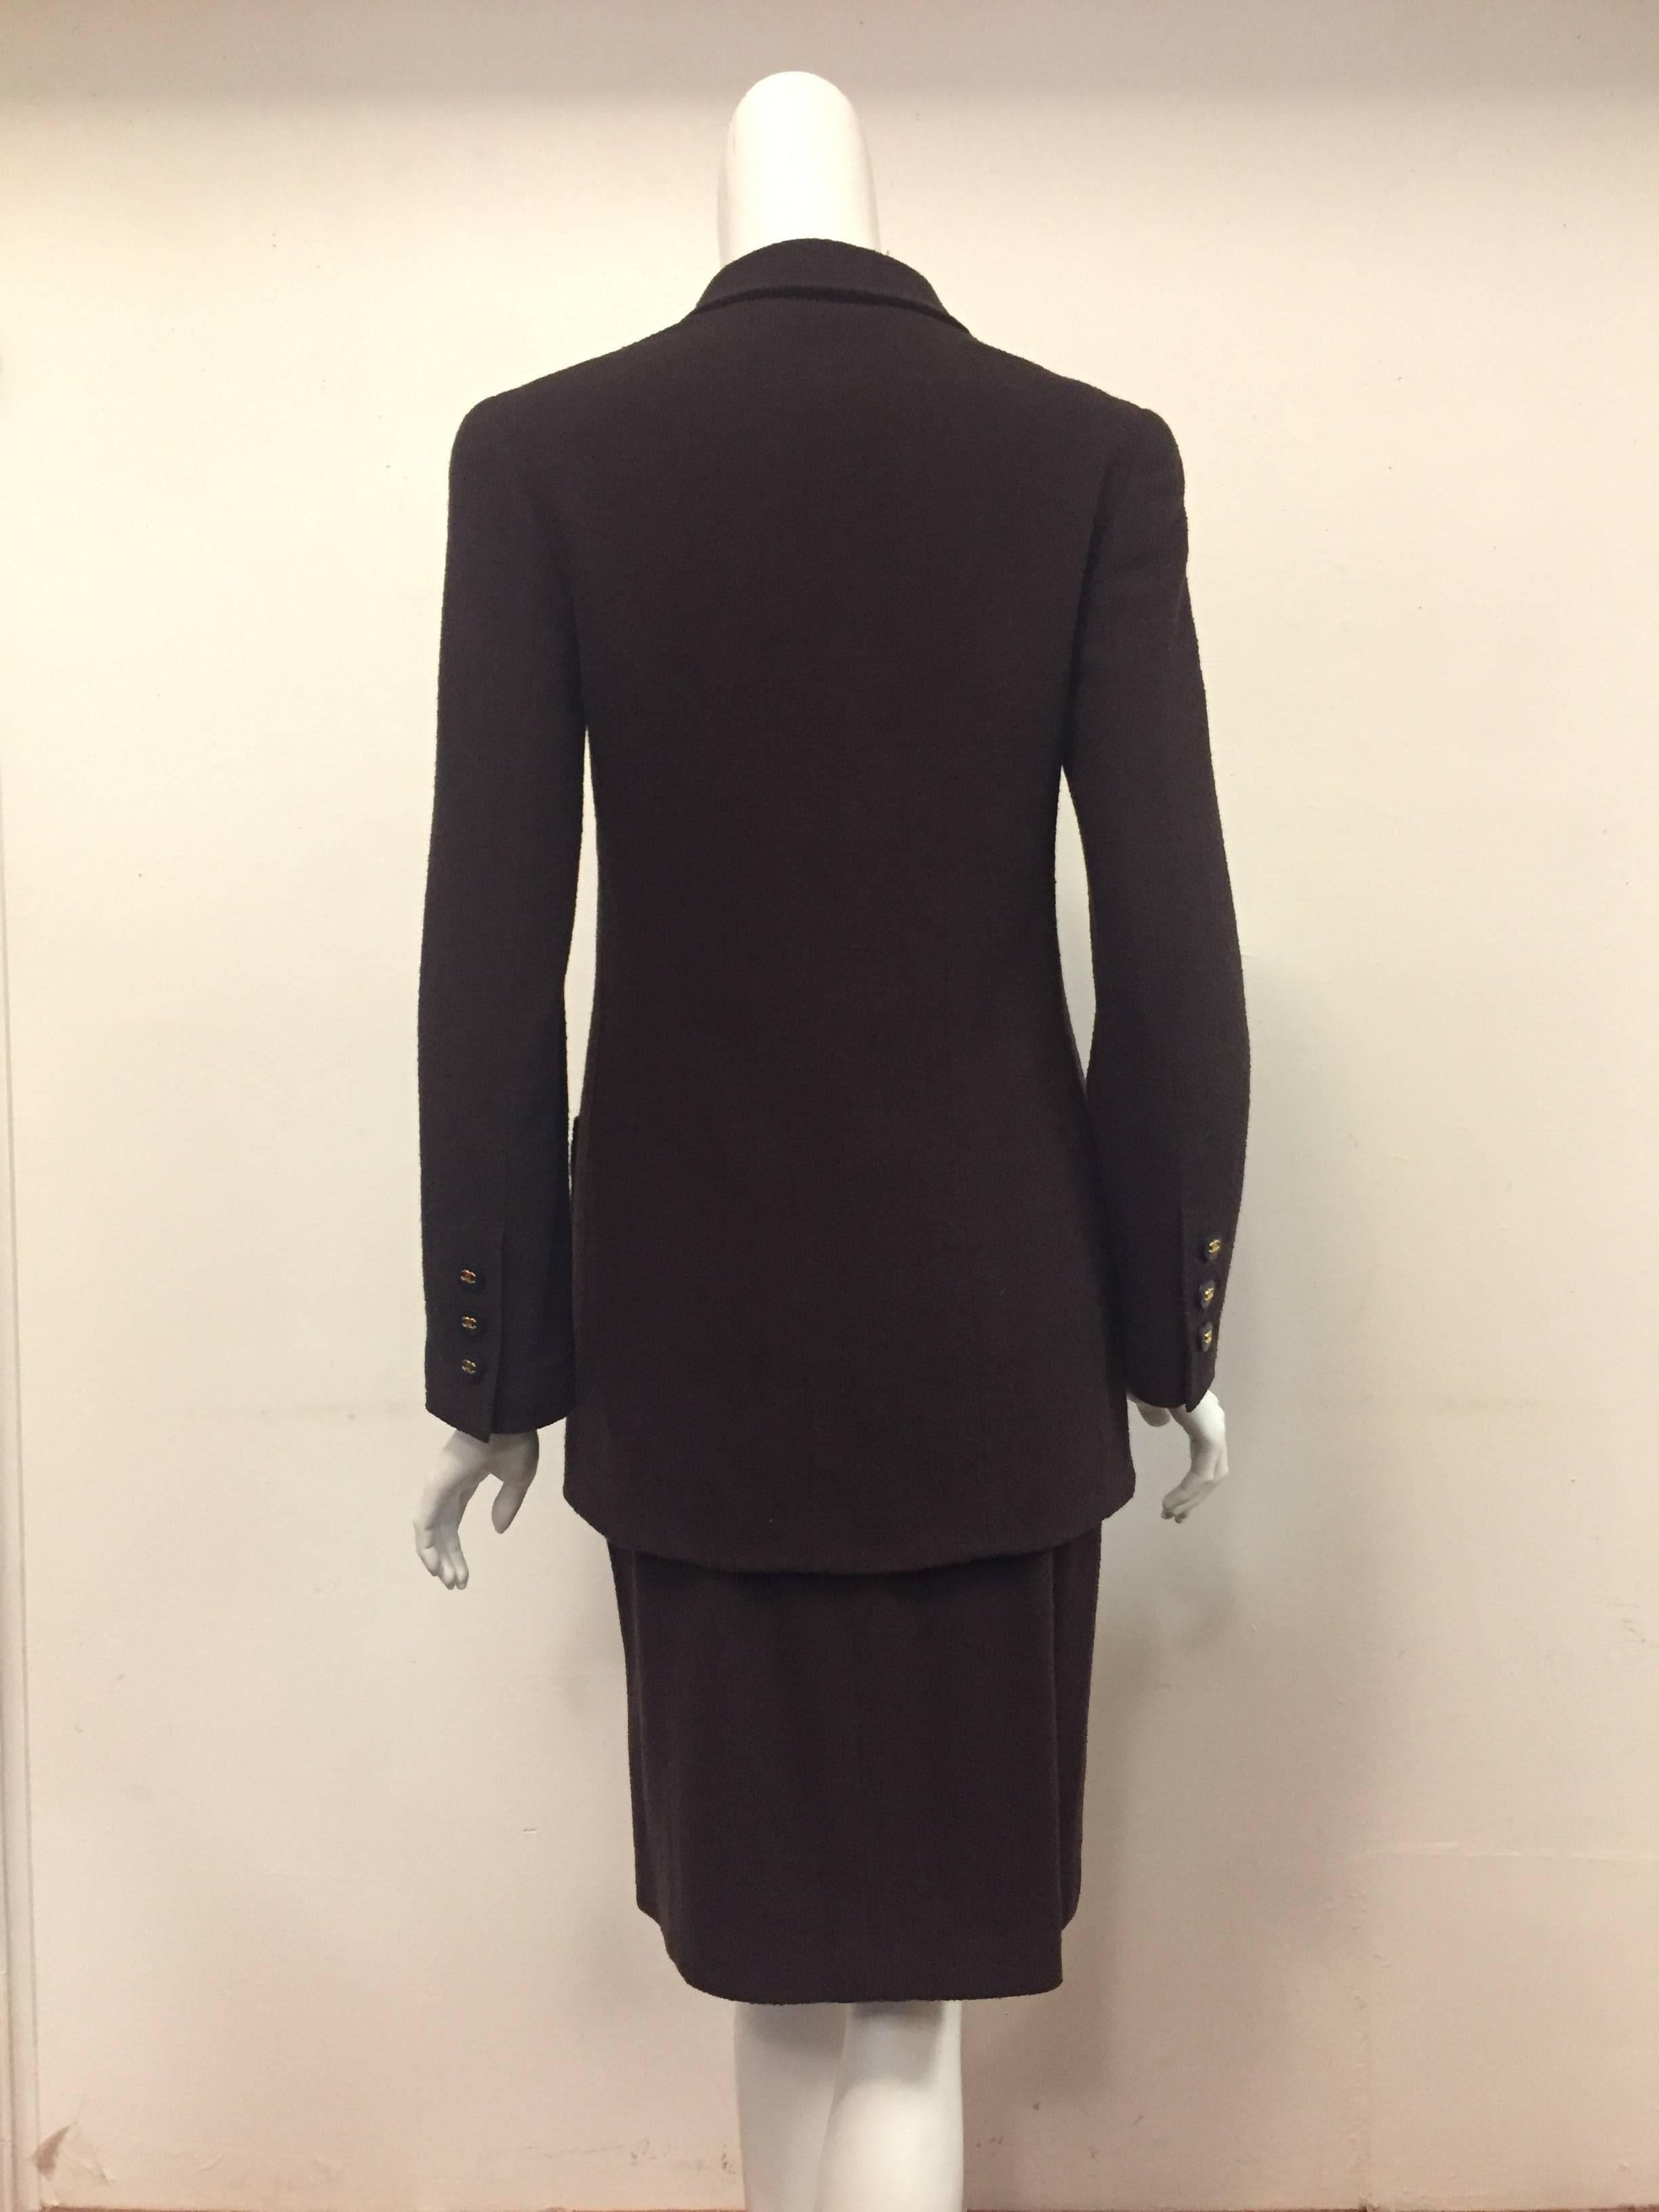 Black Chanel Boutique Chocolate Wool Blend Skirt Suit with Longer Length Jacket For Sale